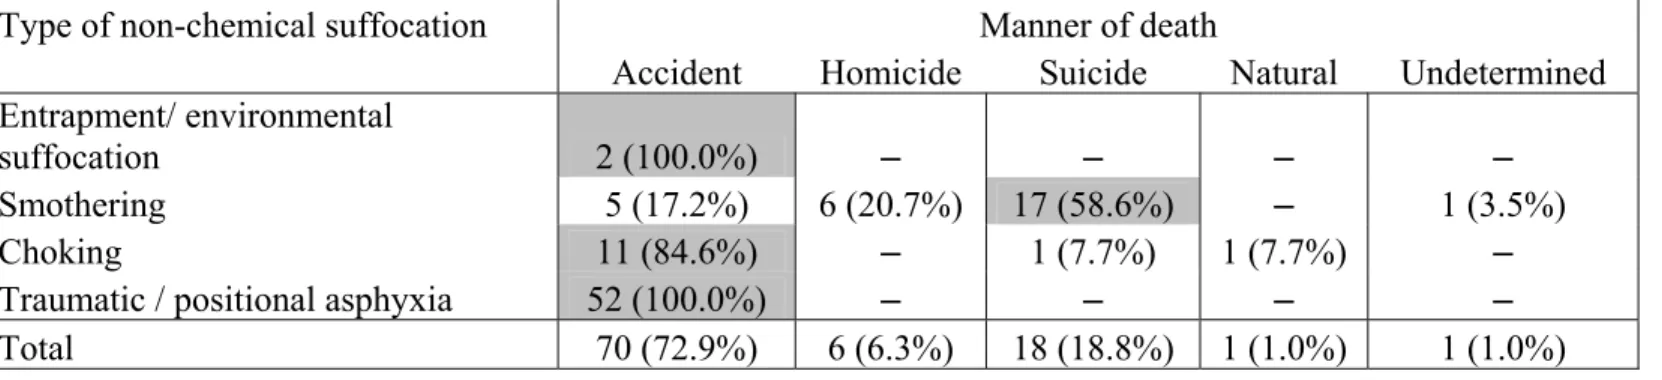 Table 3 - Type of non-chemical suffocation in relation to manner of death 